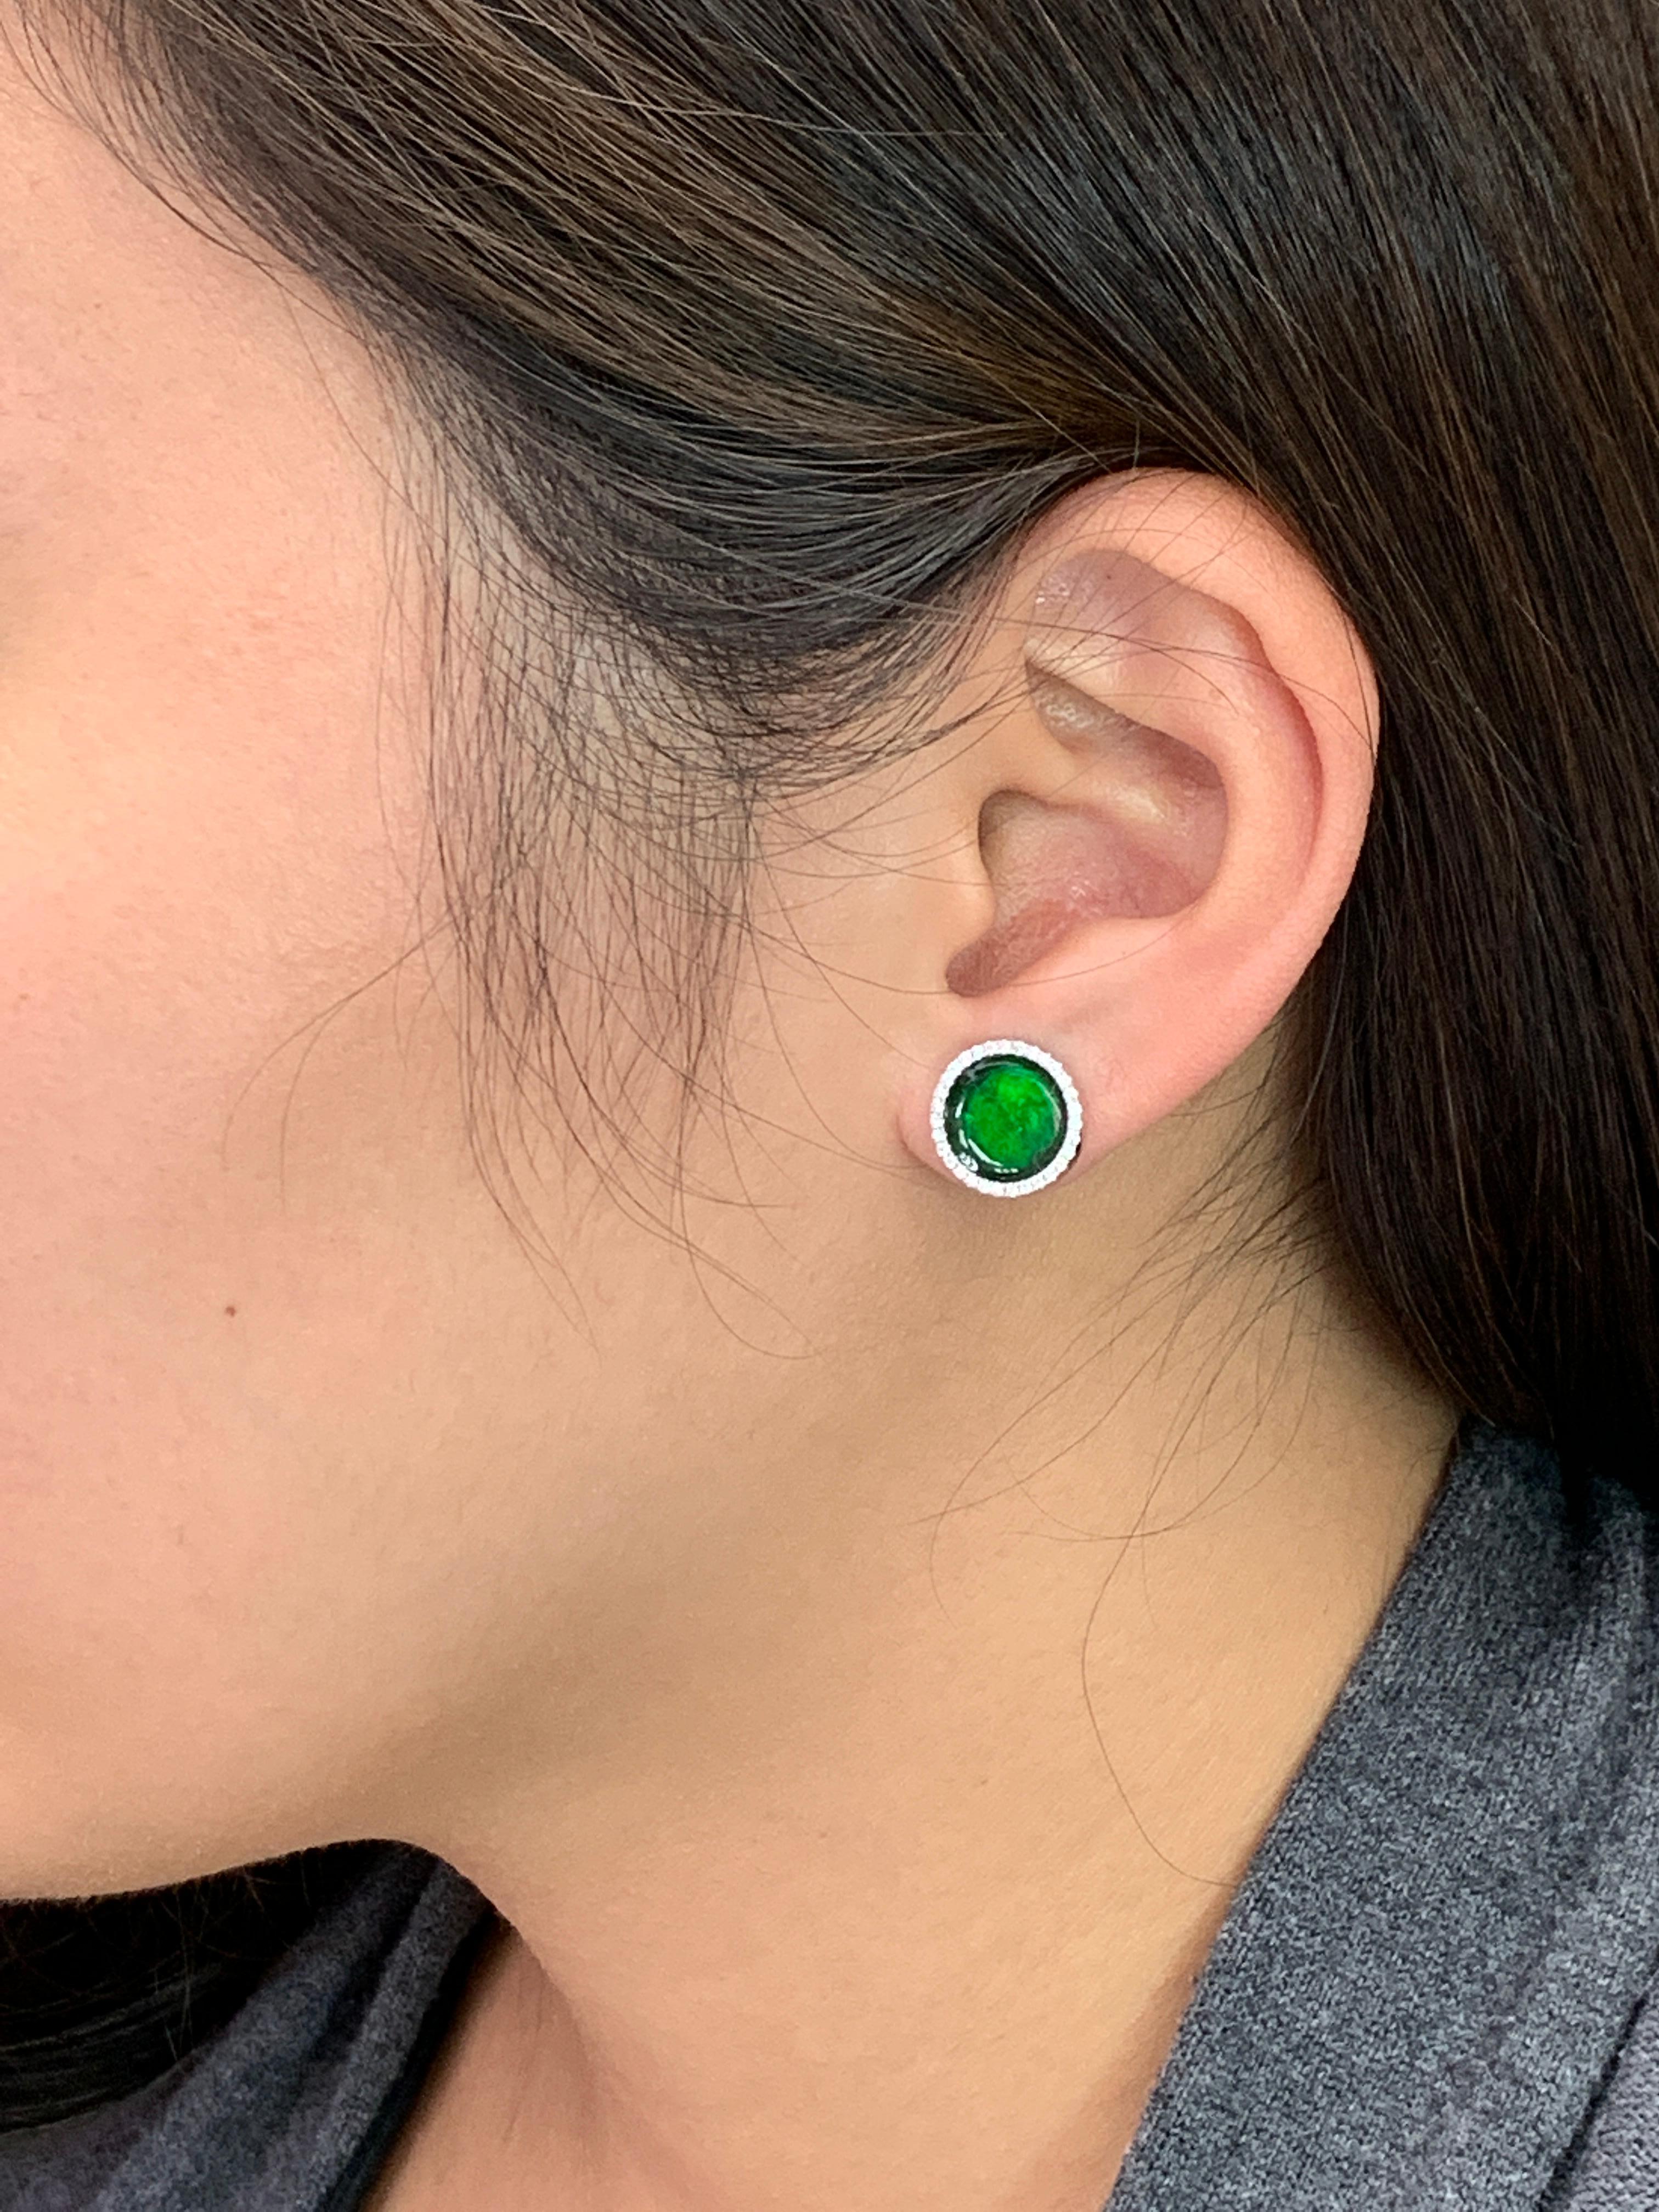 Here is a nice pair of spinach green Jade earrings. The diameter is about 12mm each. The earrings are set in 18k white gold and diamonds. The untreated / unenhanced natural jade is translucent. The color is spinach green. These jade are full of